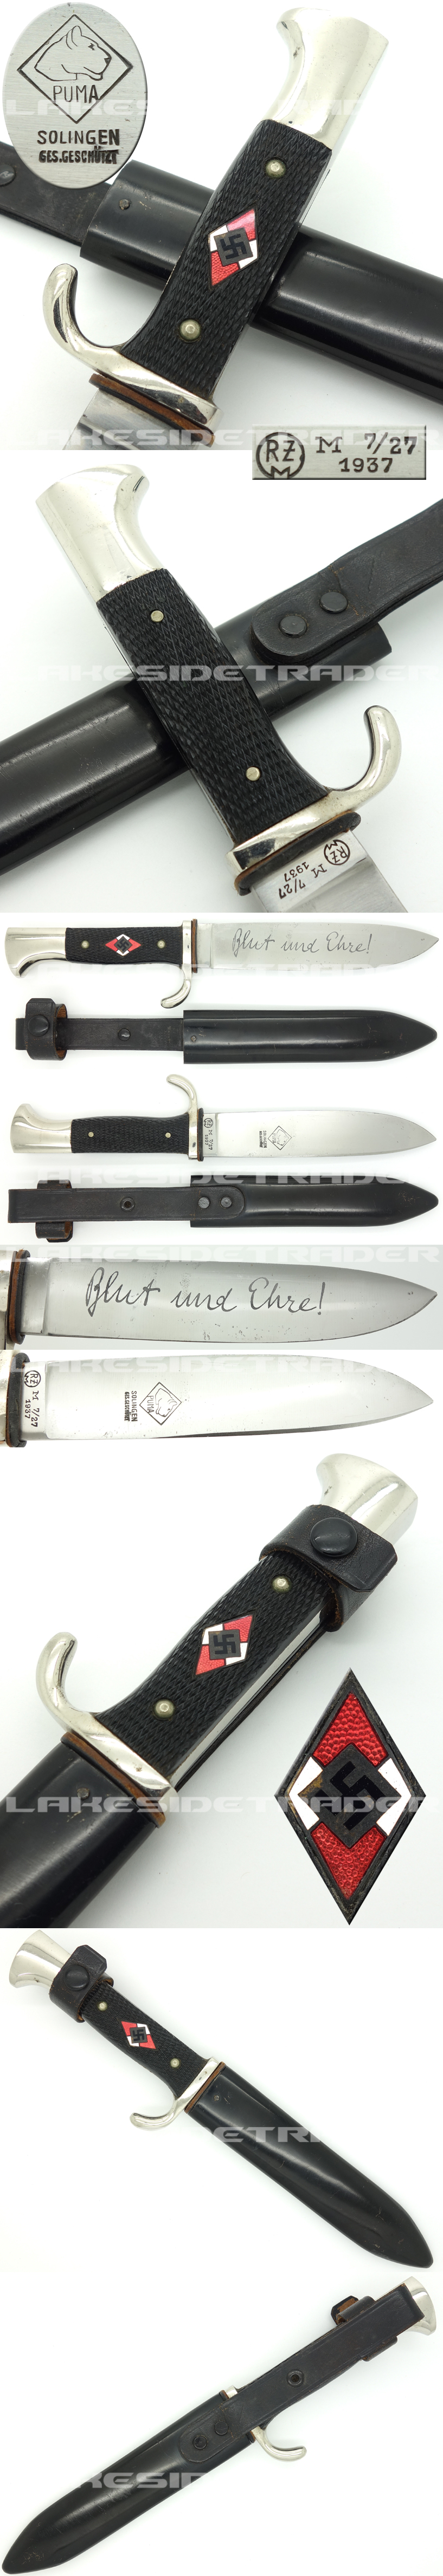 Minty - Transitional Hitler Youth Knife by Puma 1937